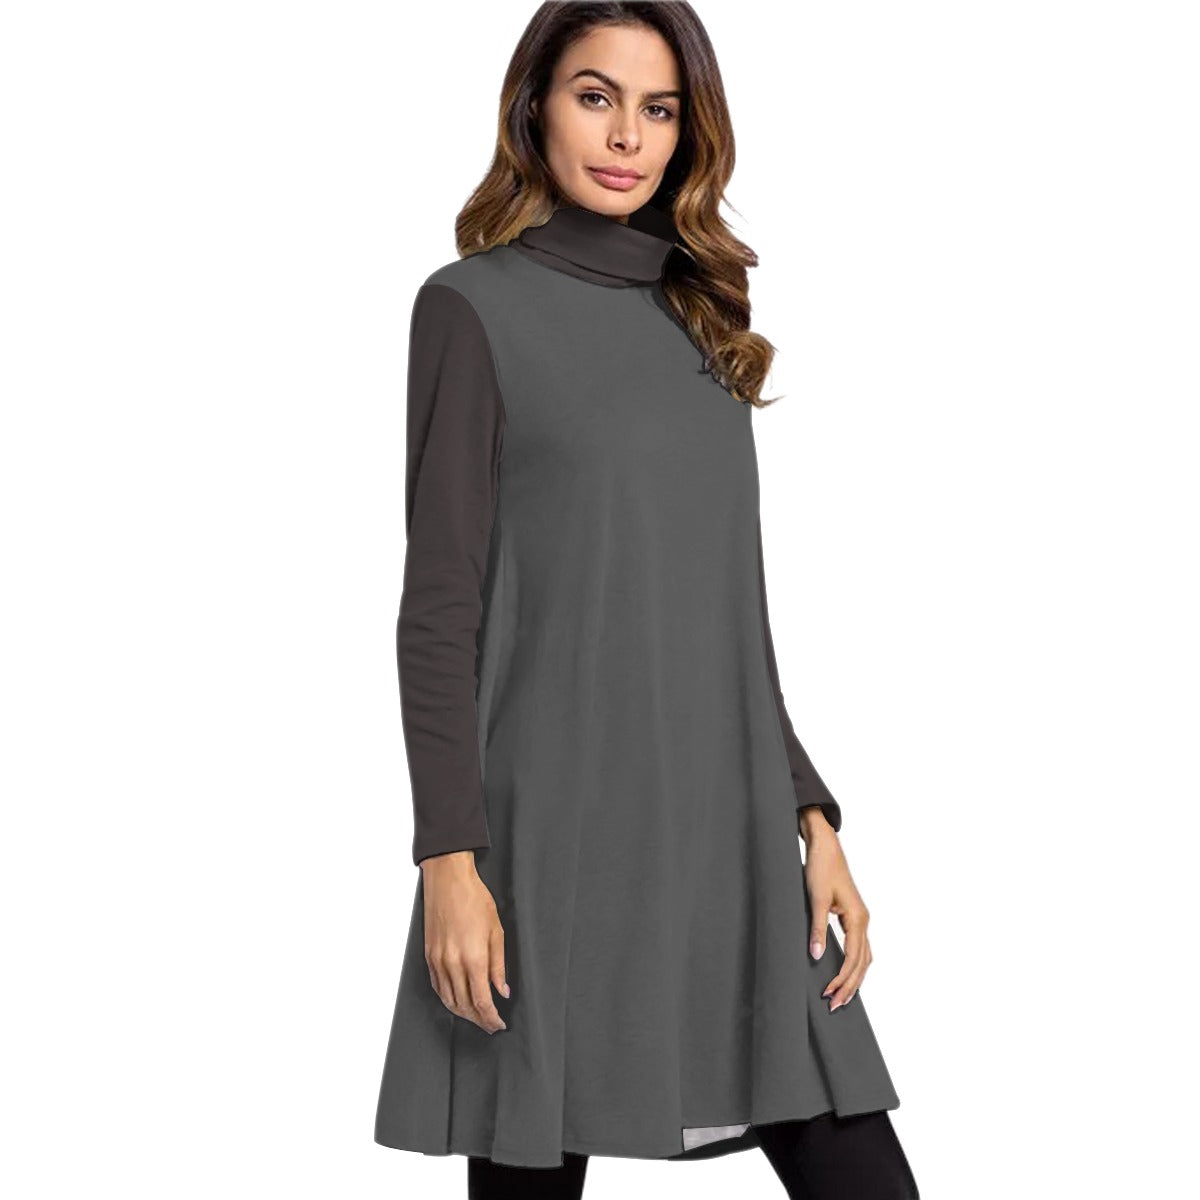 Women's High Neck Zen and Yoga Dress With Long Sleeve - Personal Hour for Yoga and Meditations 